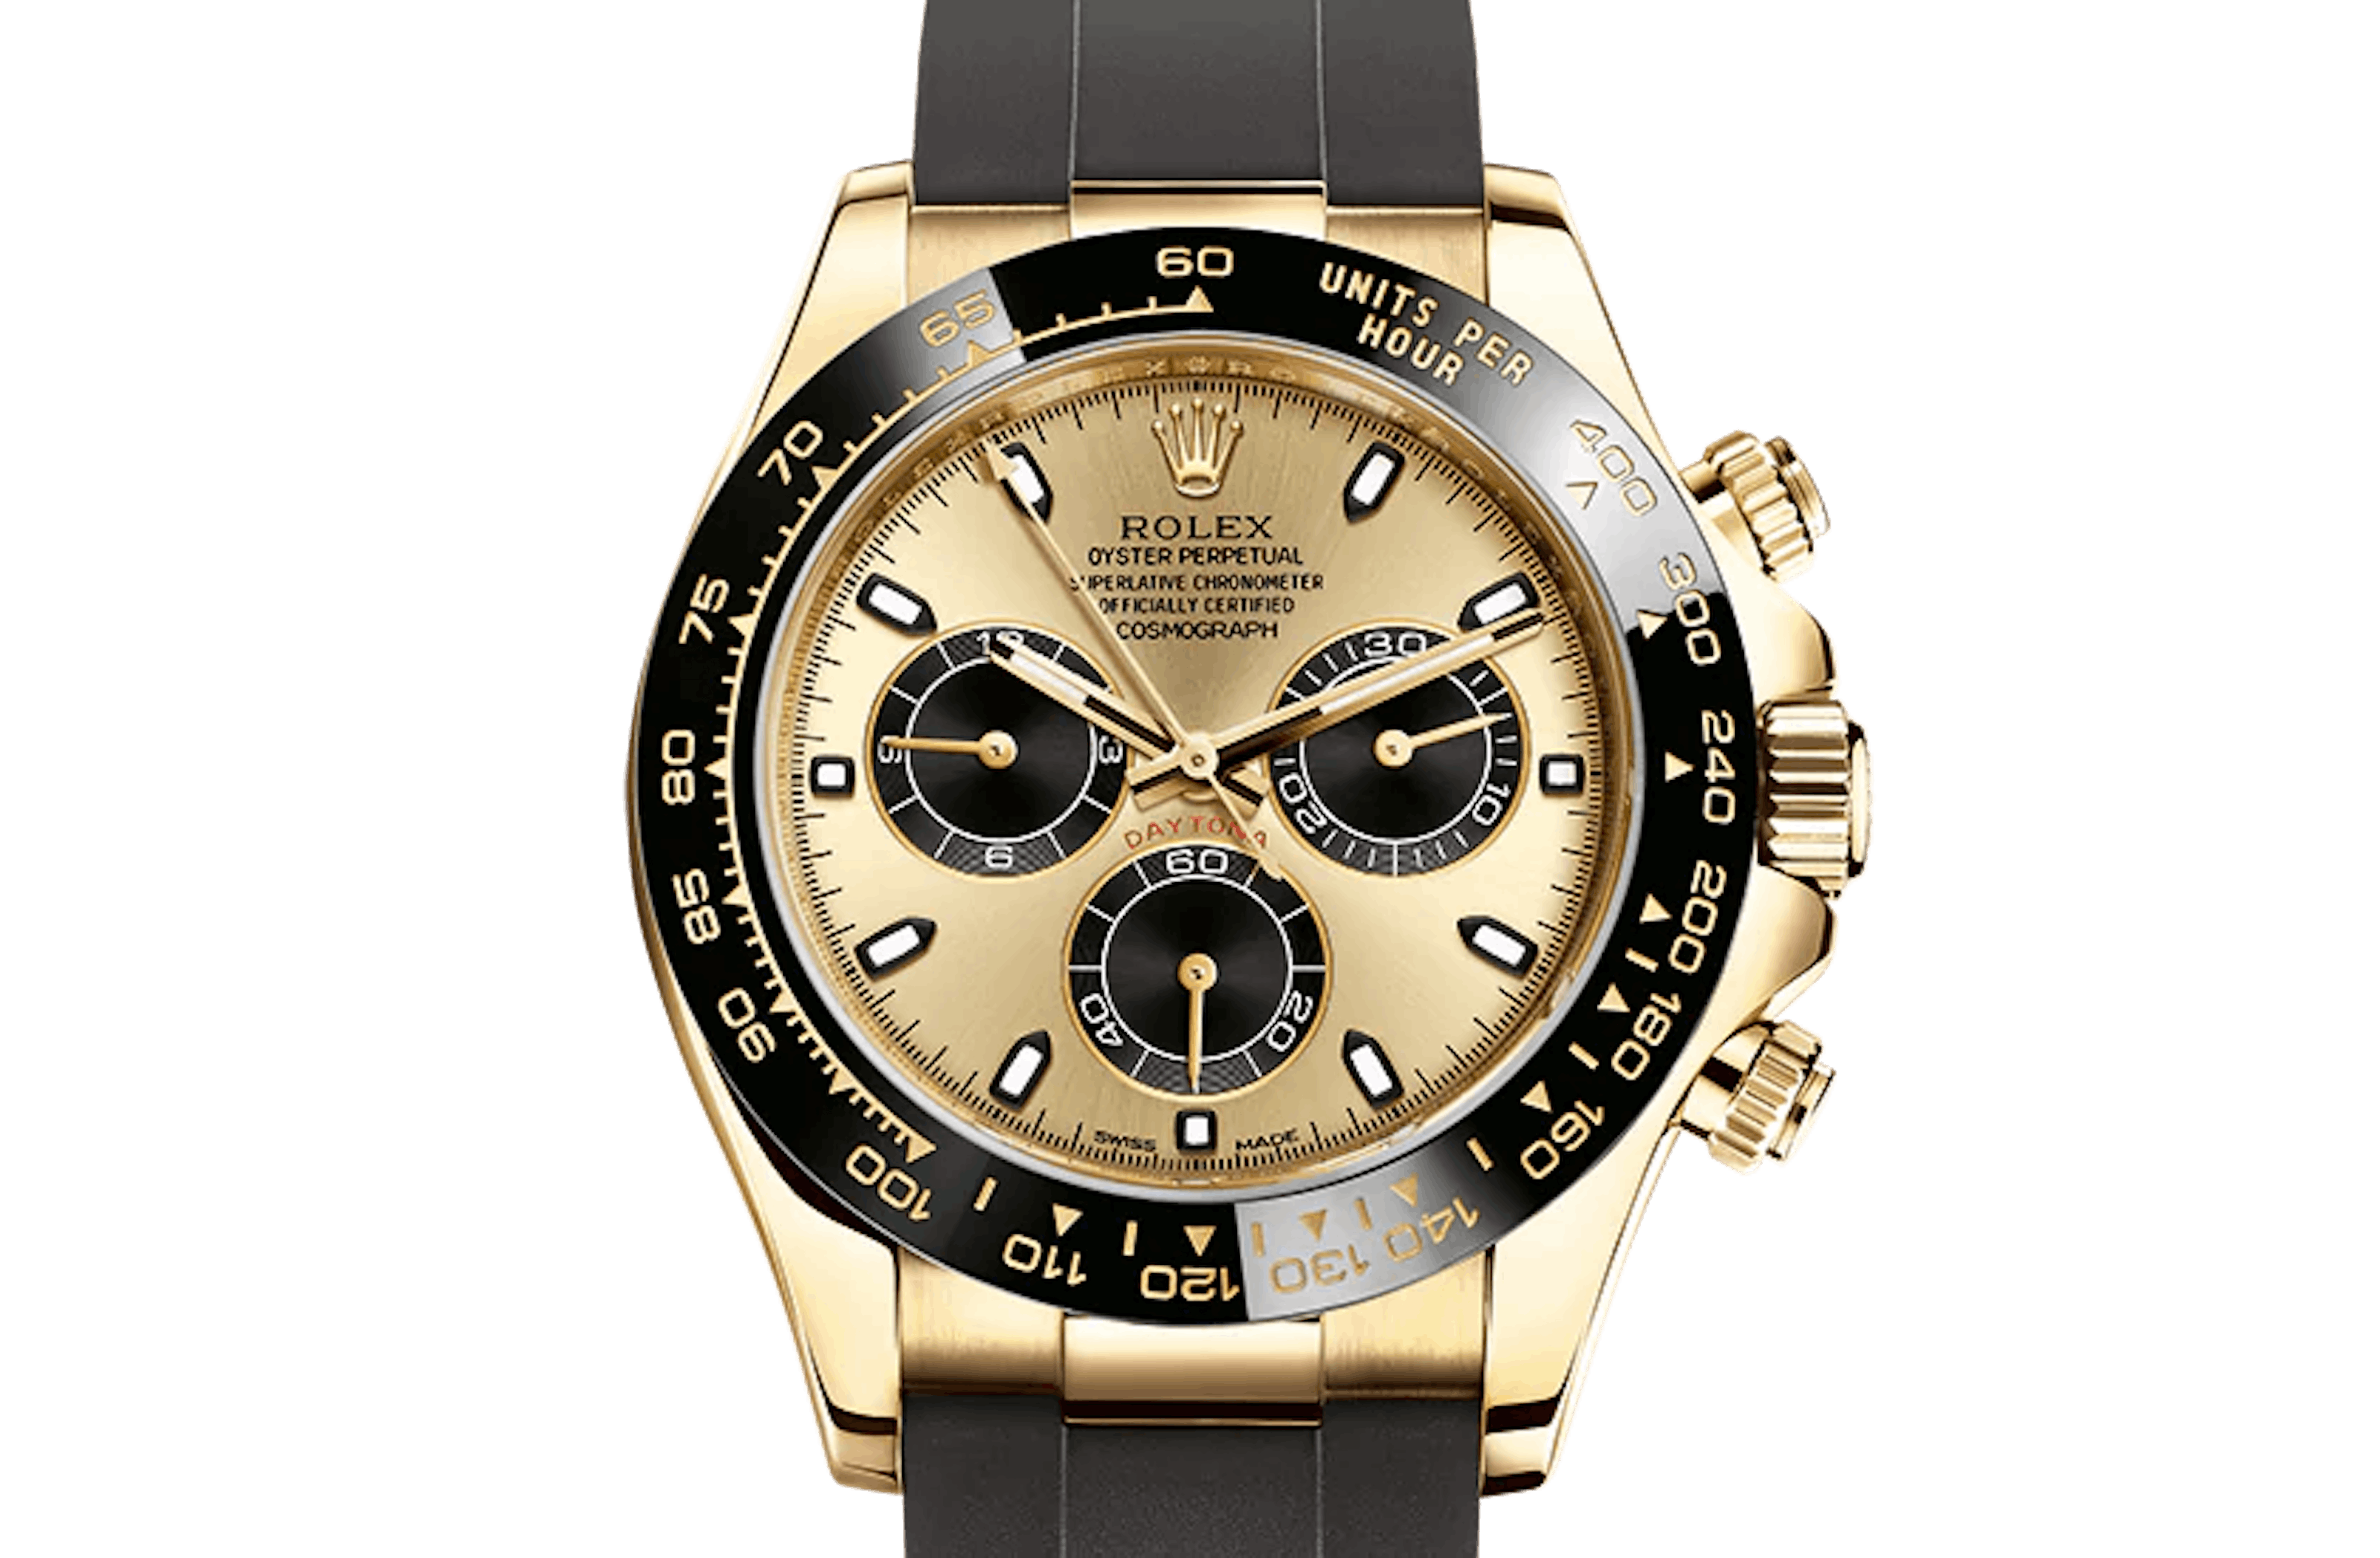 Rolex Daytona 116519 MT White Gold &amp; Meteorite Dial: Out of This World